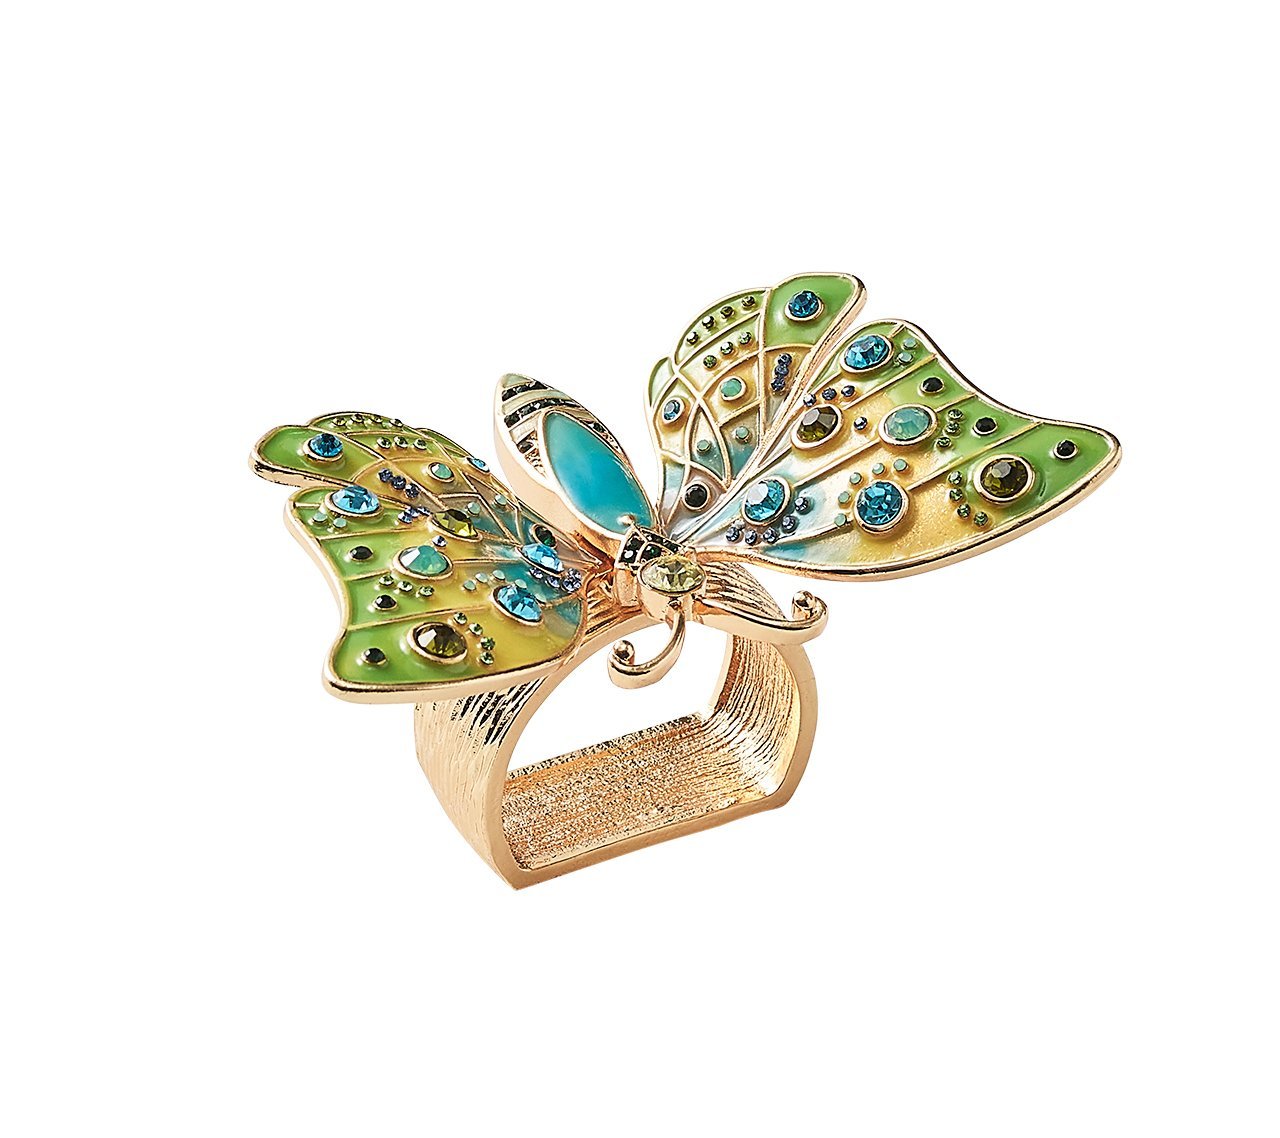 Arbor Napkin Ring featuring a hand-painted butterfly in blue and green on a golden ring